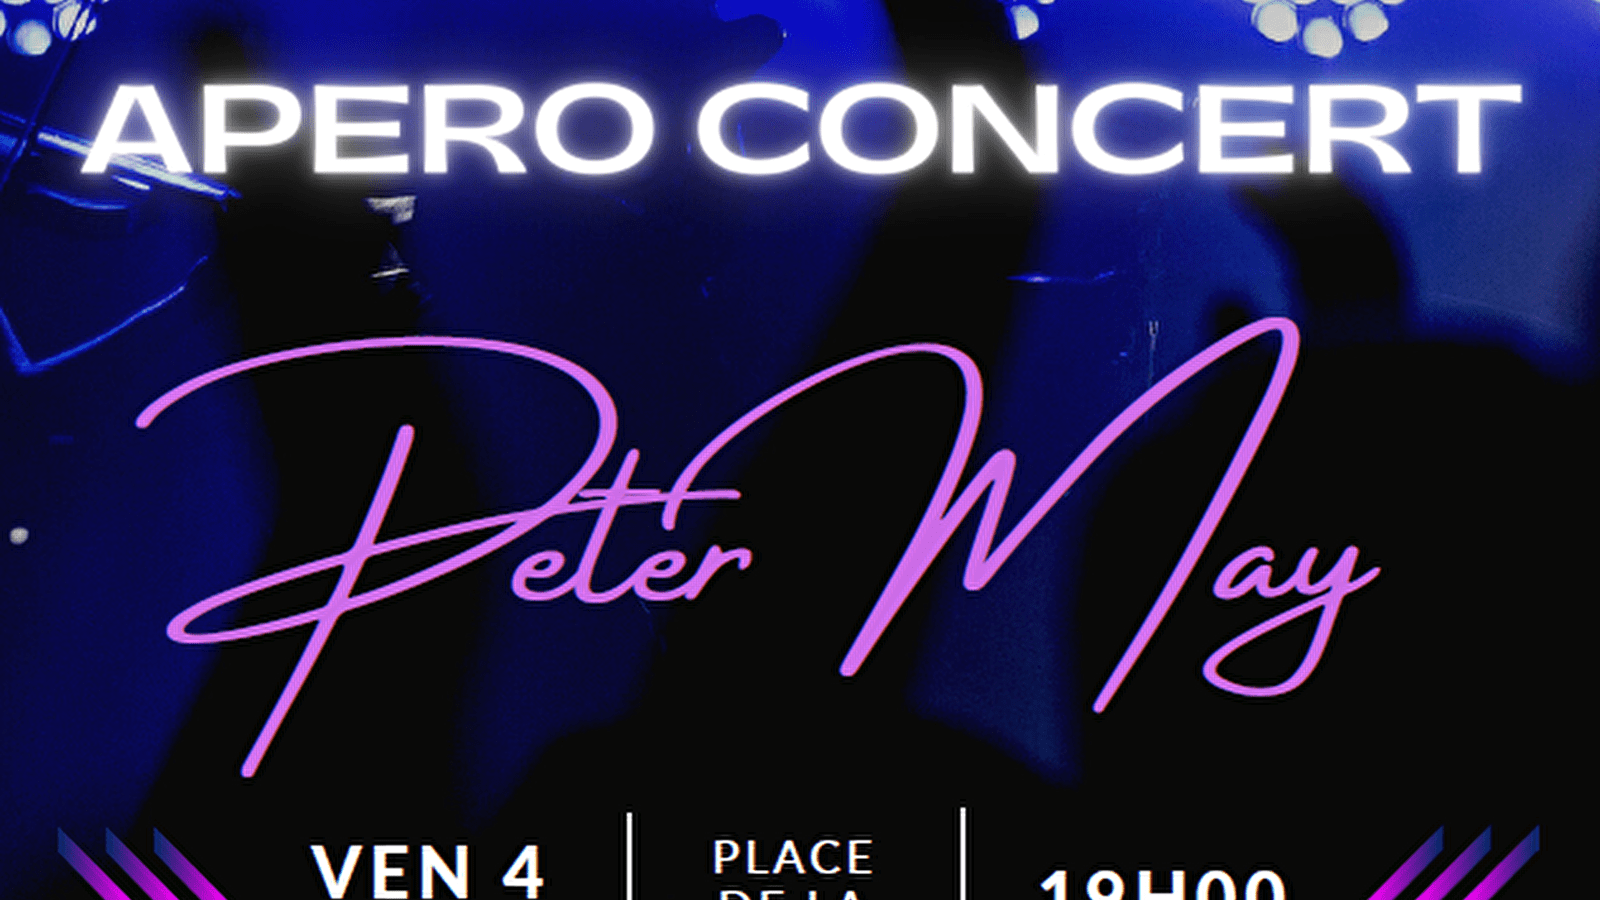 APERO CONCERT with PETER MAY